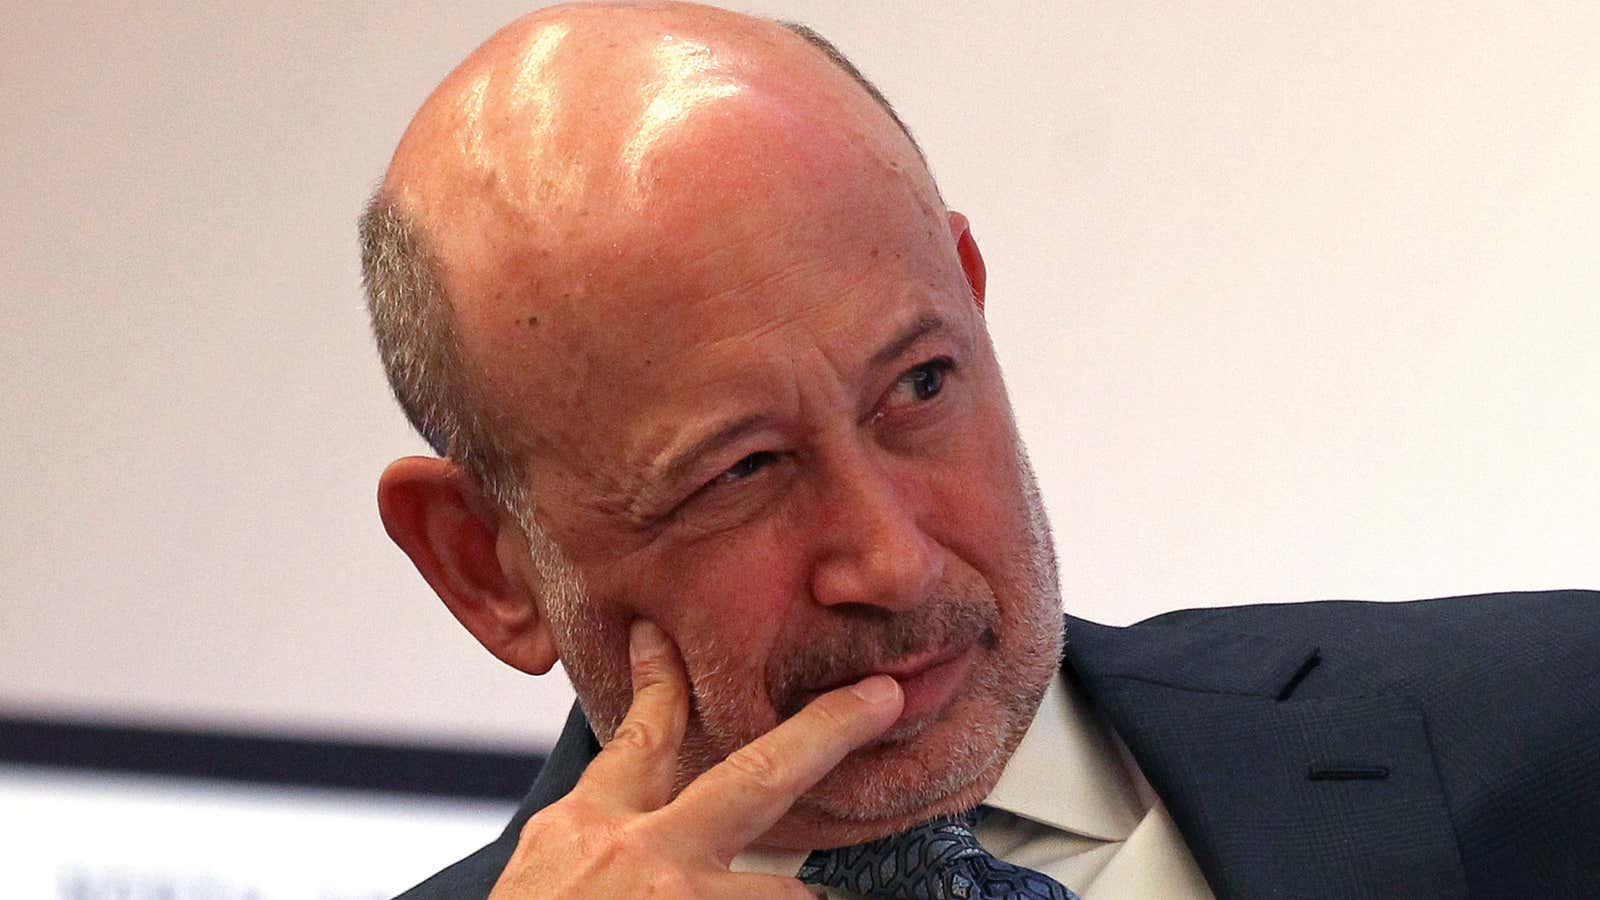 Chief Executive Lloyd Blankfein may have to rethink Goldman’s strategy.